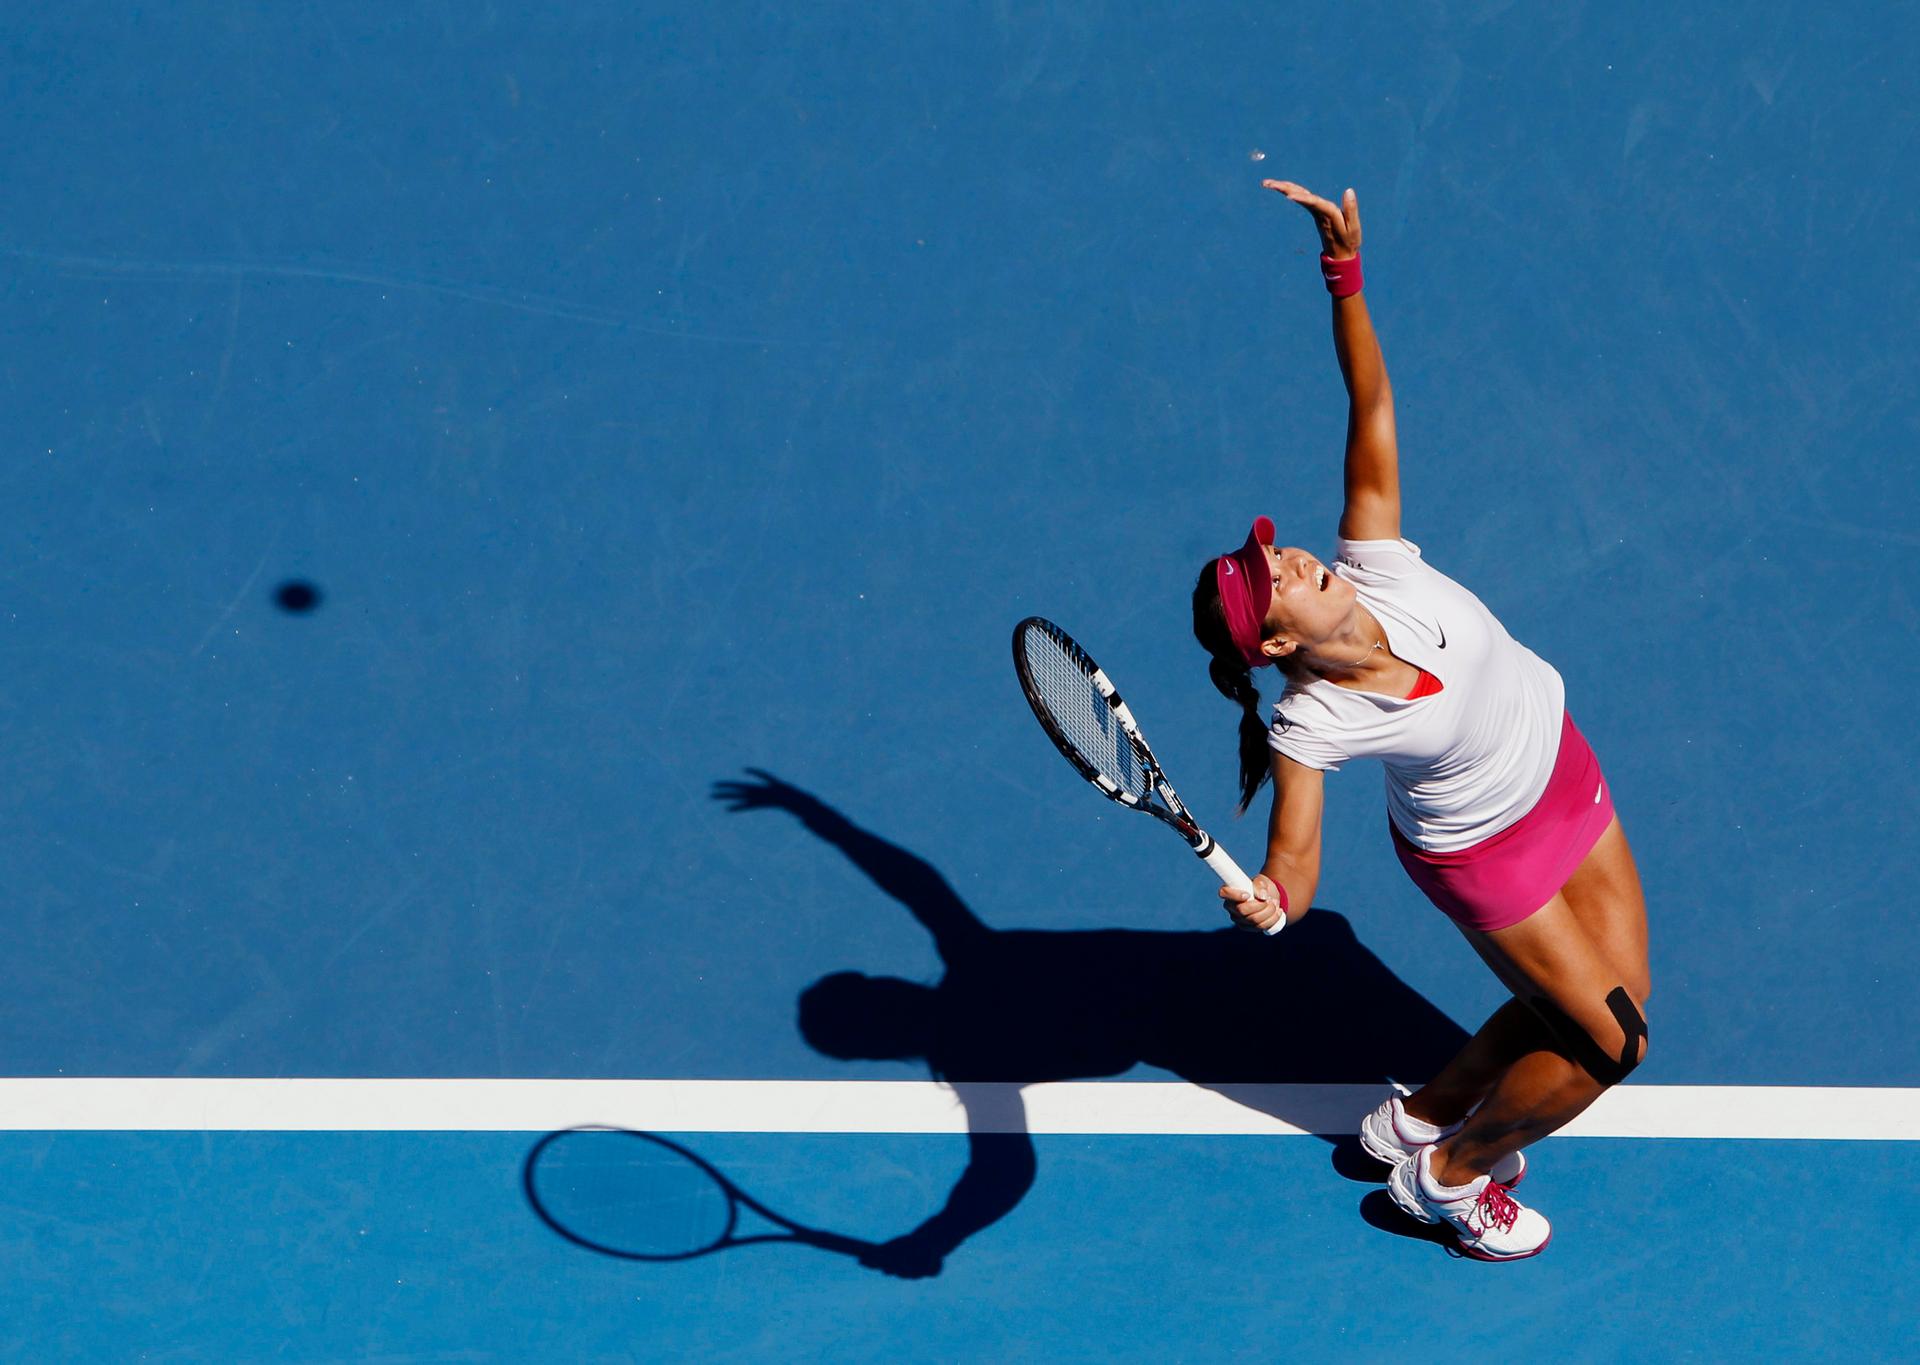 Li Na of China serves to Lucie Safarova of the Czech Republic during their women's singles match at the Australian Open 2014 tennis tournament in Melbourne January 17, 2014.